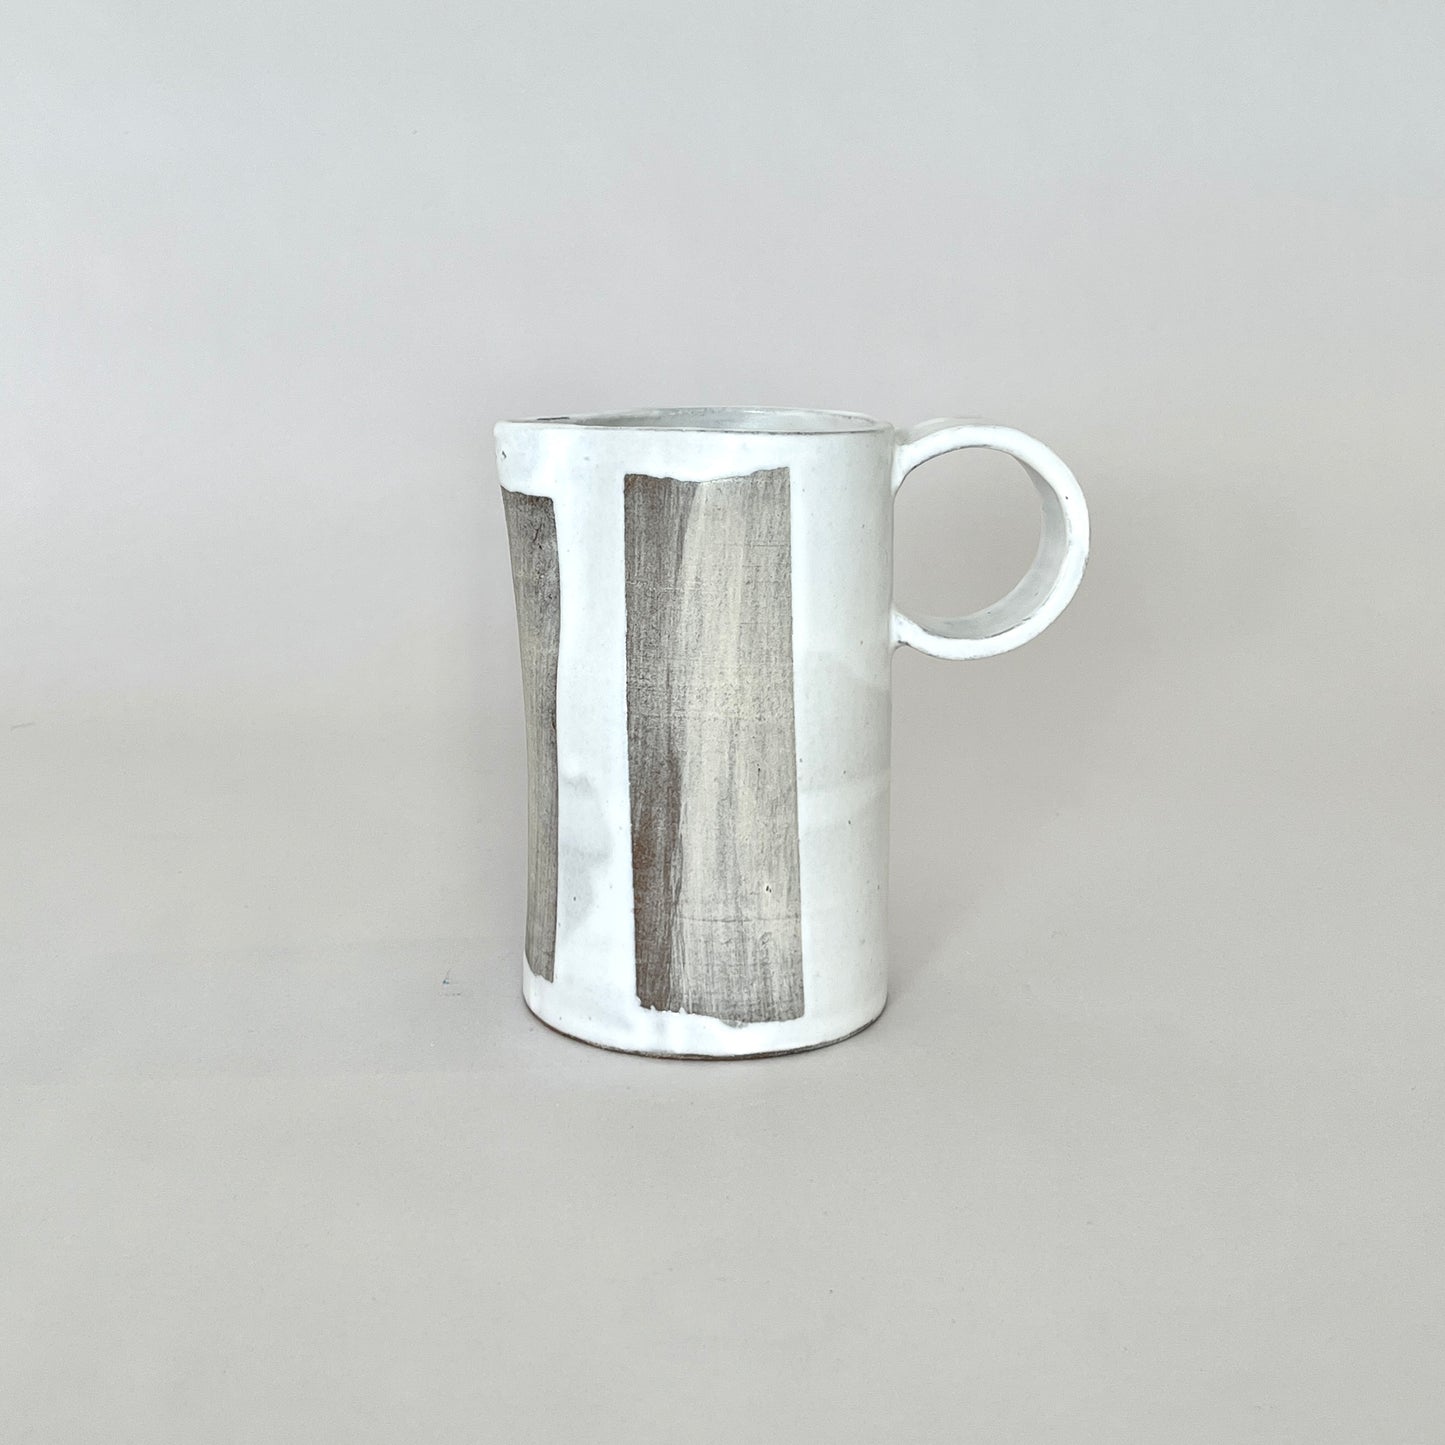 Painter Tape Pitcher, Small White No.1